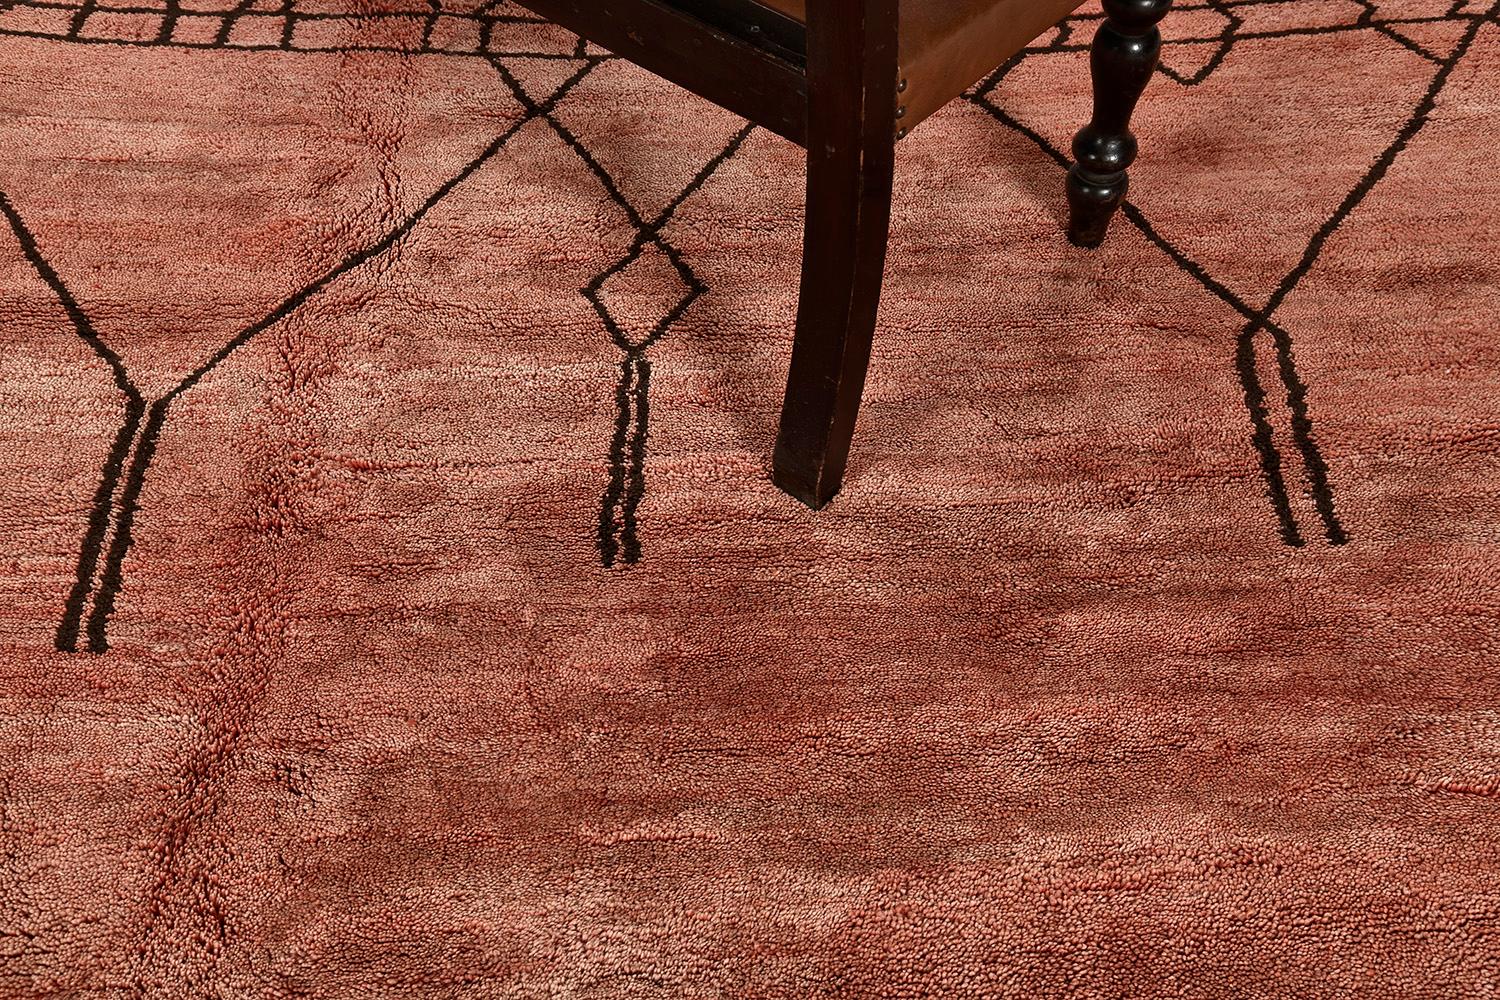 Adding this up to your collection will make your guests in awe. This gorgeous Morrocan Rug features one of the stories of Middle Atlas Tribe handwoven in clay-tone wool. It makes it more unique when lozenges, zigzag, crisscross, and ambiguous Berber